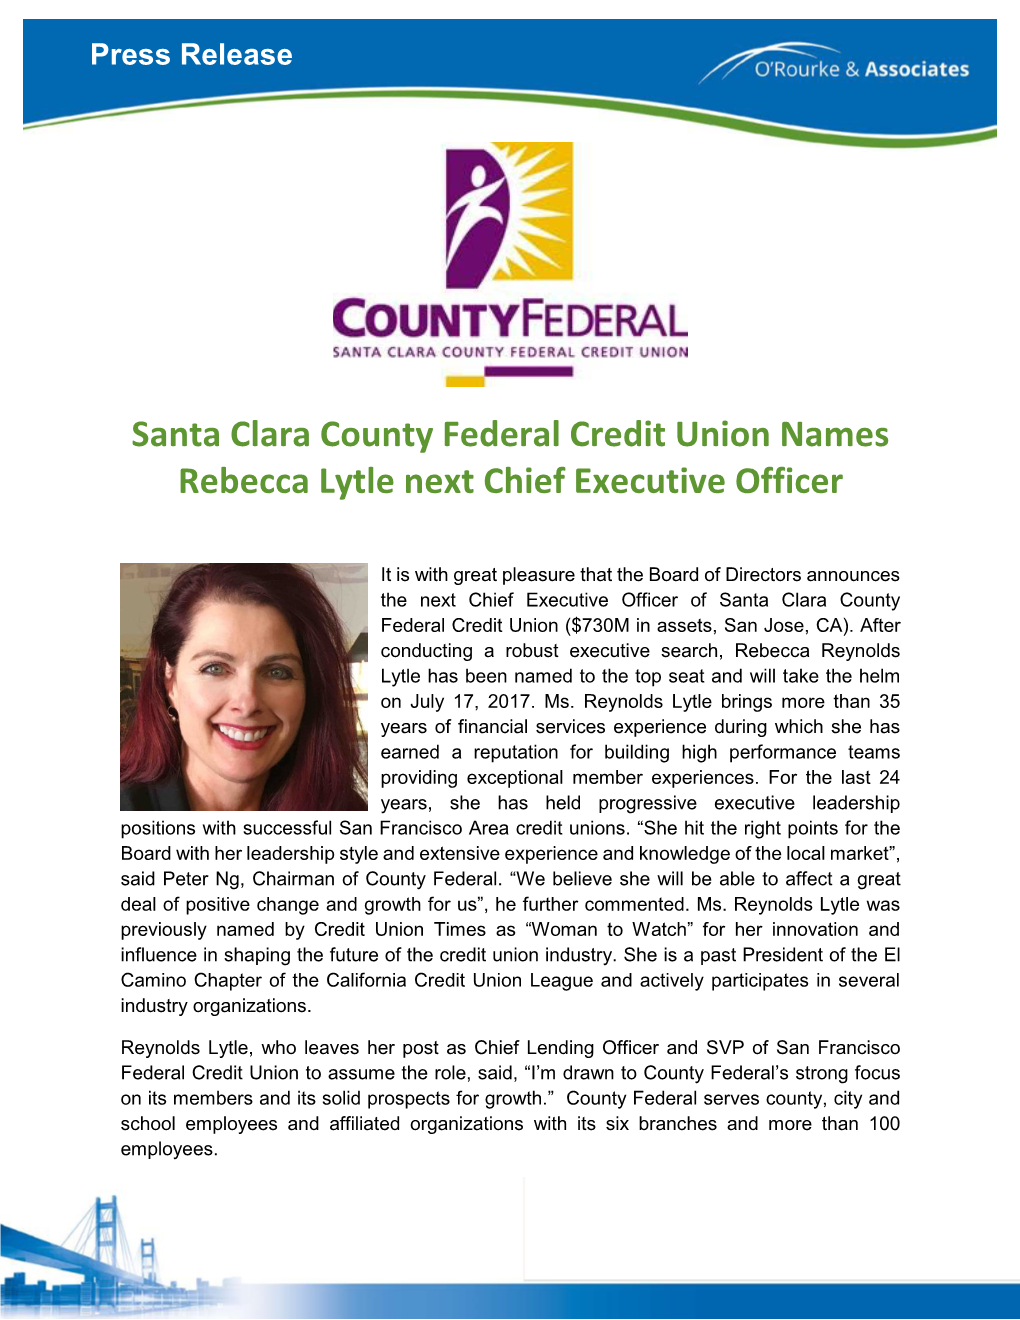 Santa Clara County Federal Credit Union Names Rebecca Lytle Next Chief Executive Officer